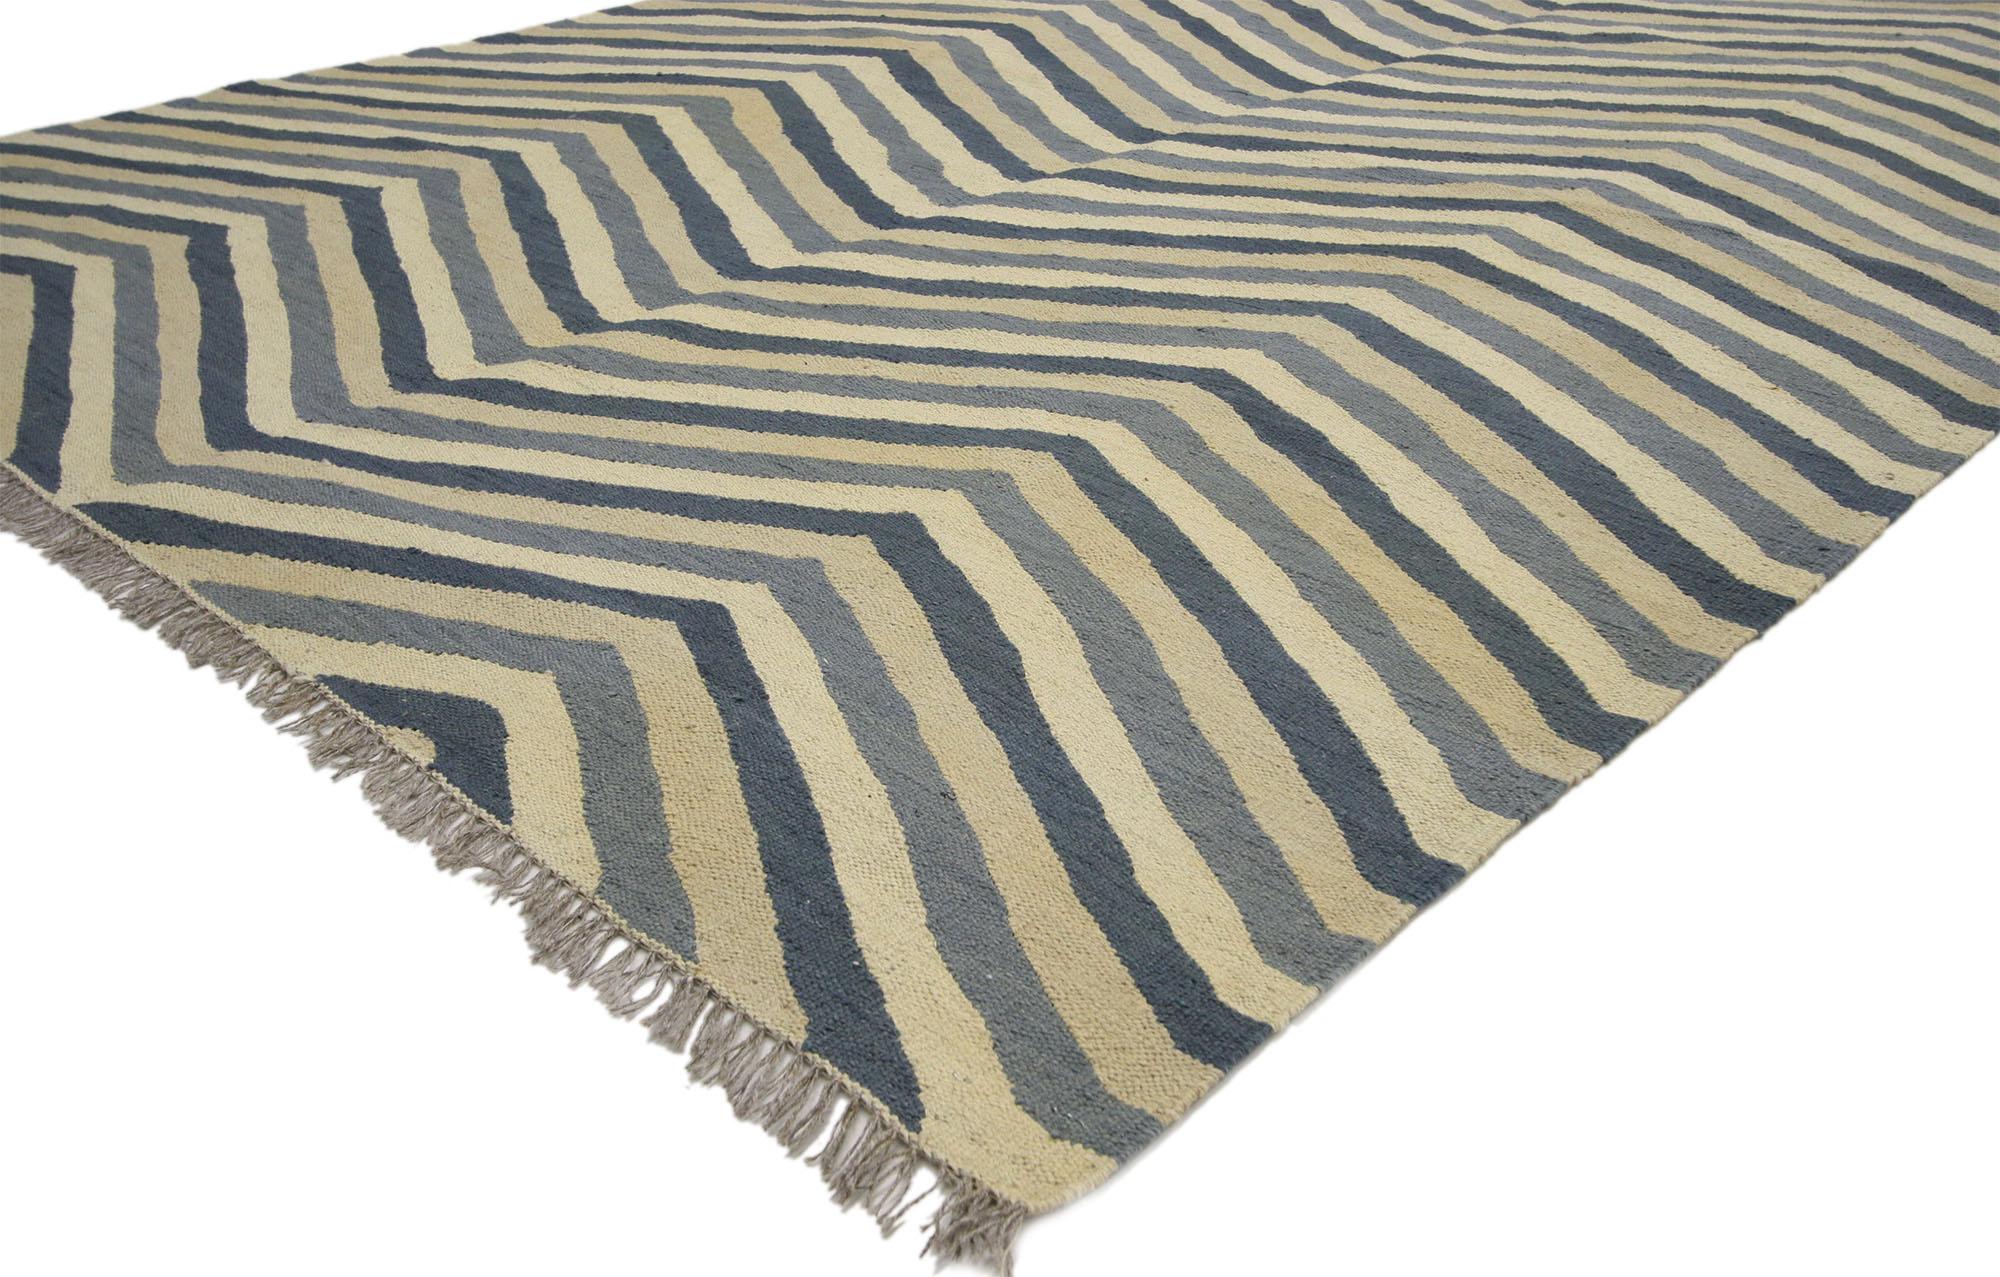 80453, new Kilim area rug with Herringbone Chevron Design and Coastal Living style. This handwoven wool vintage kilim area rug features a classic Herringbone Chevron pattern in a subtle color palette. With its simplistic design aesthetic and hygge